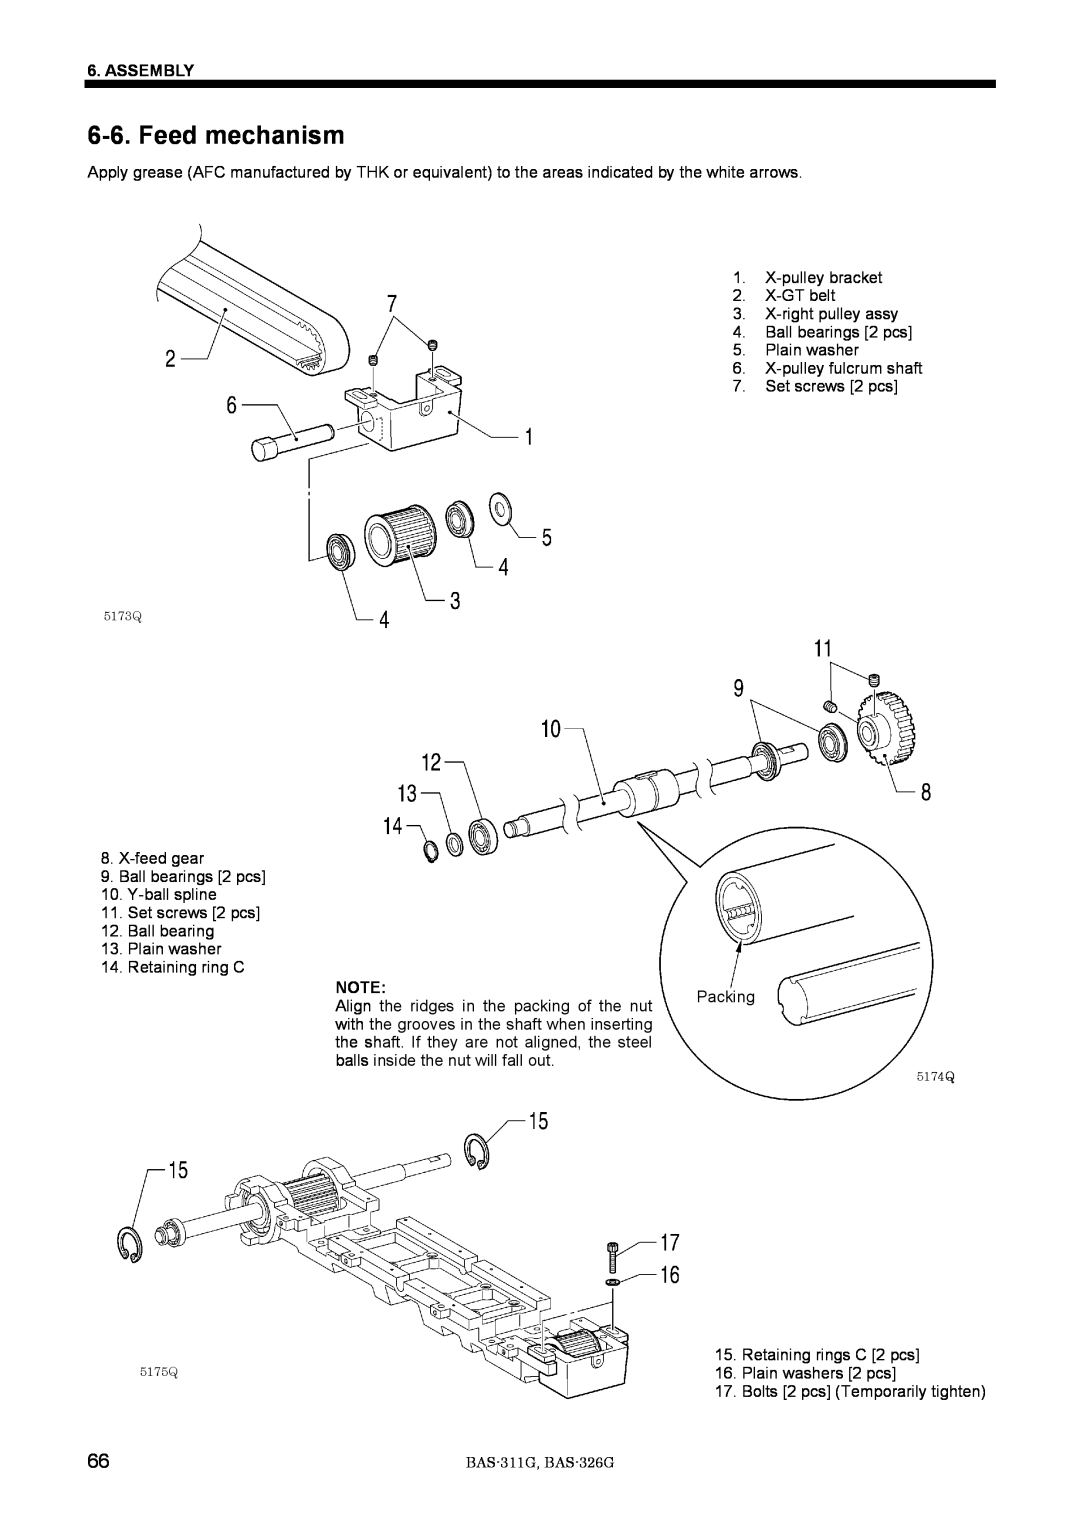 Brother BAS-311G service manual Feed mechanism, Assembly 